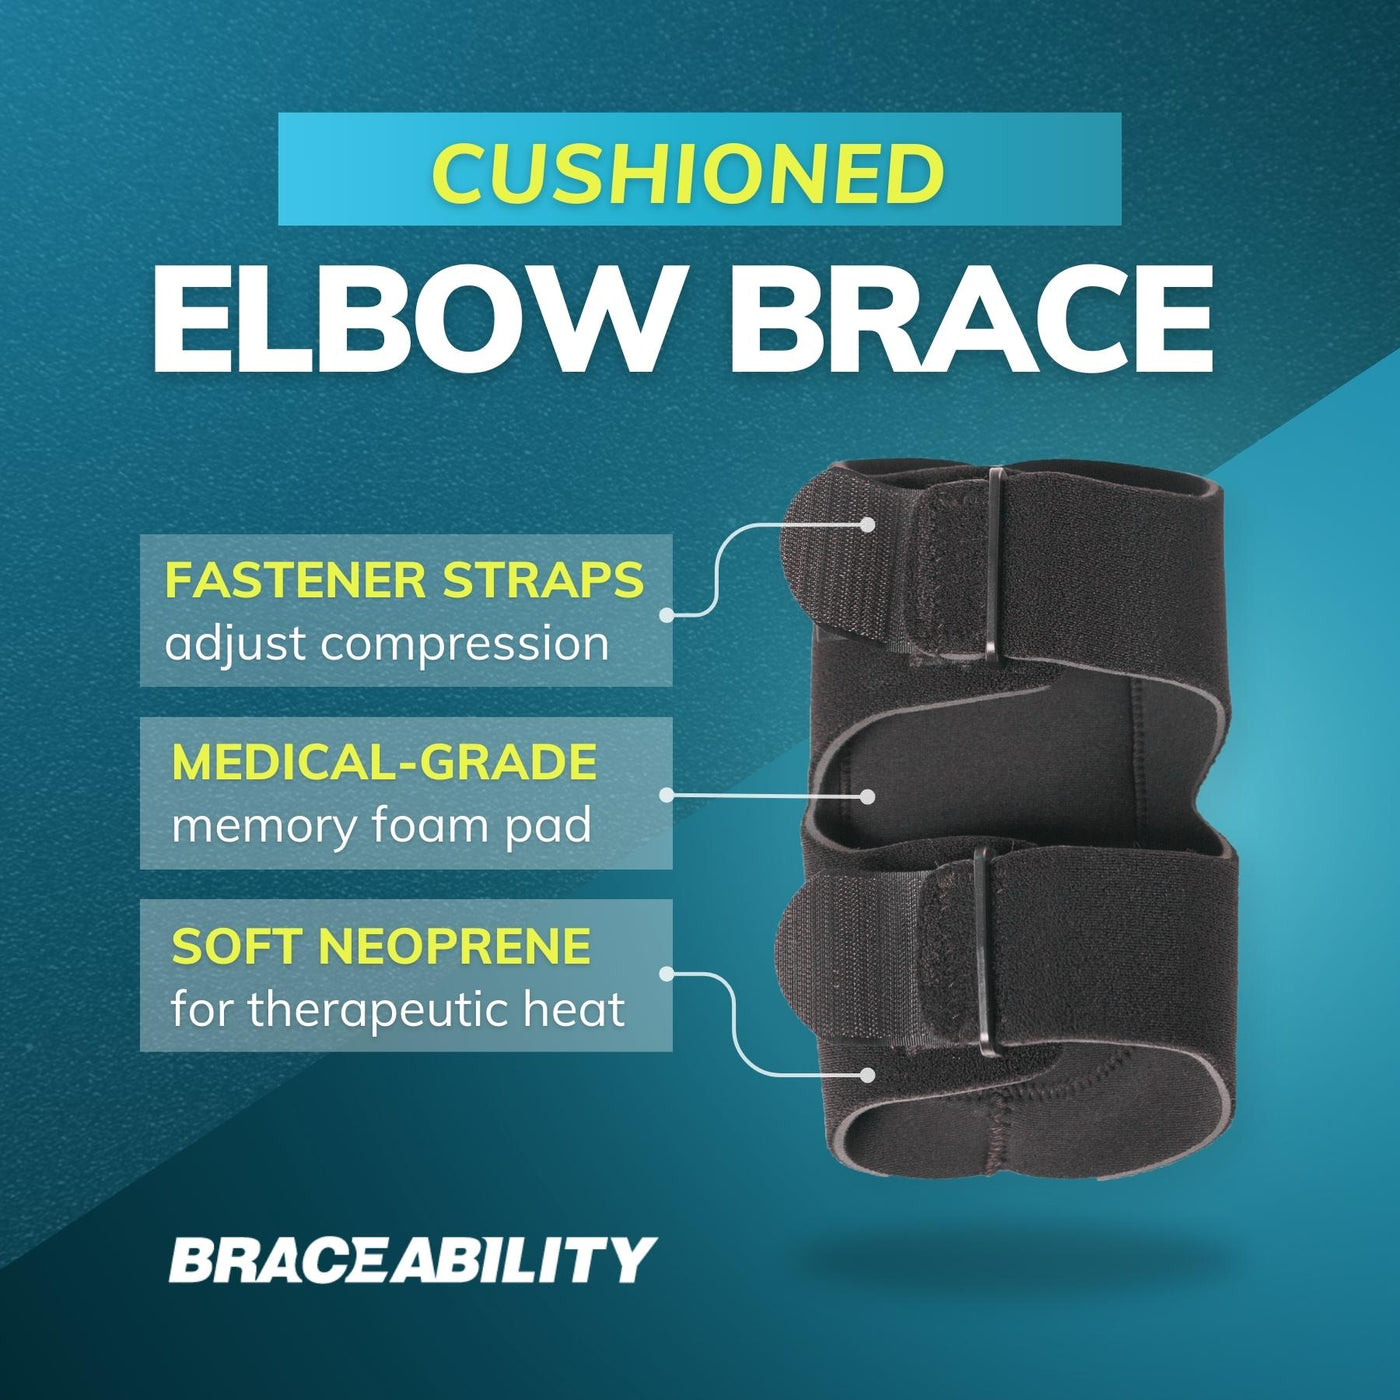 Our cushioned elbow brace has two adjustable fasteners for custom compression to relieve olecranon joint pain